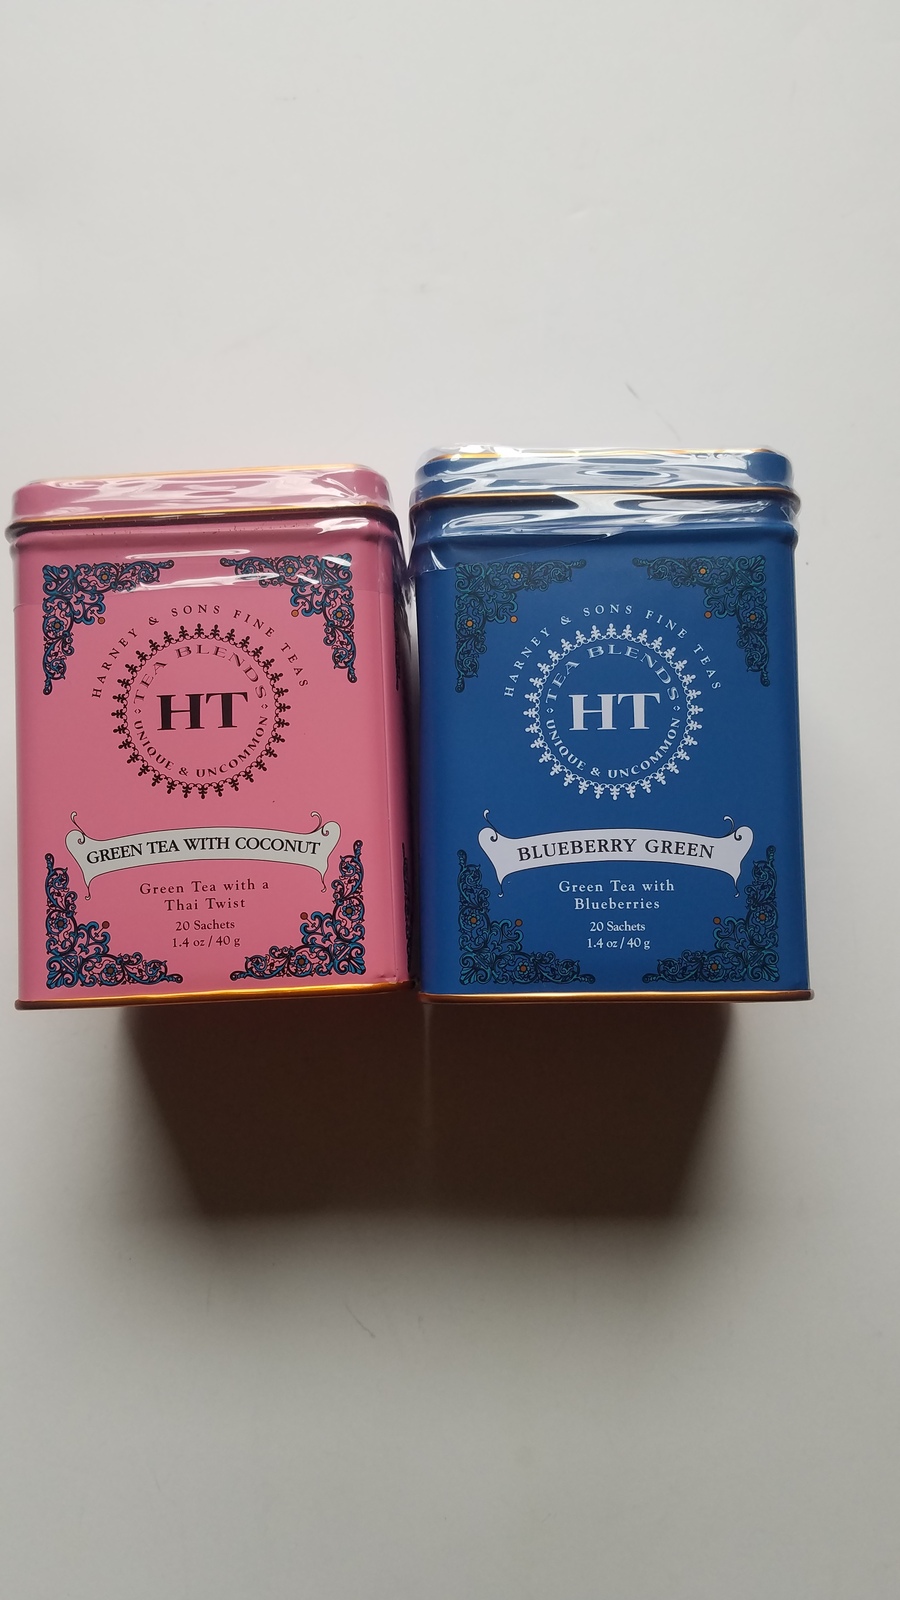 Harney and sons green tea with coconut and blueberry green combo pack - $20.00